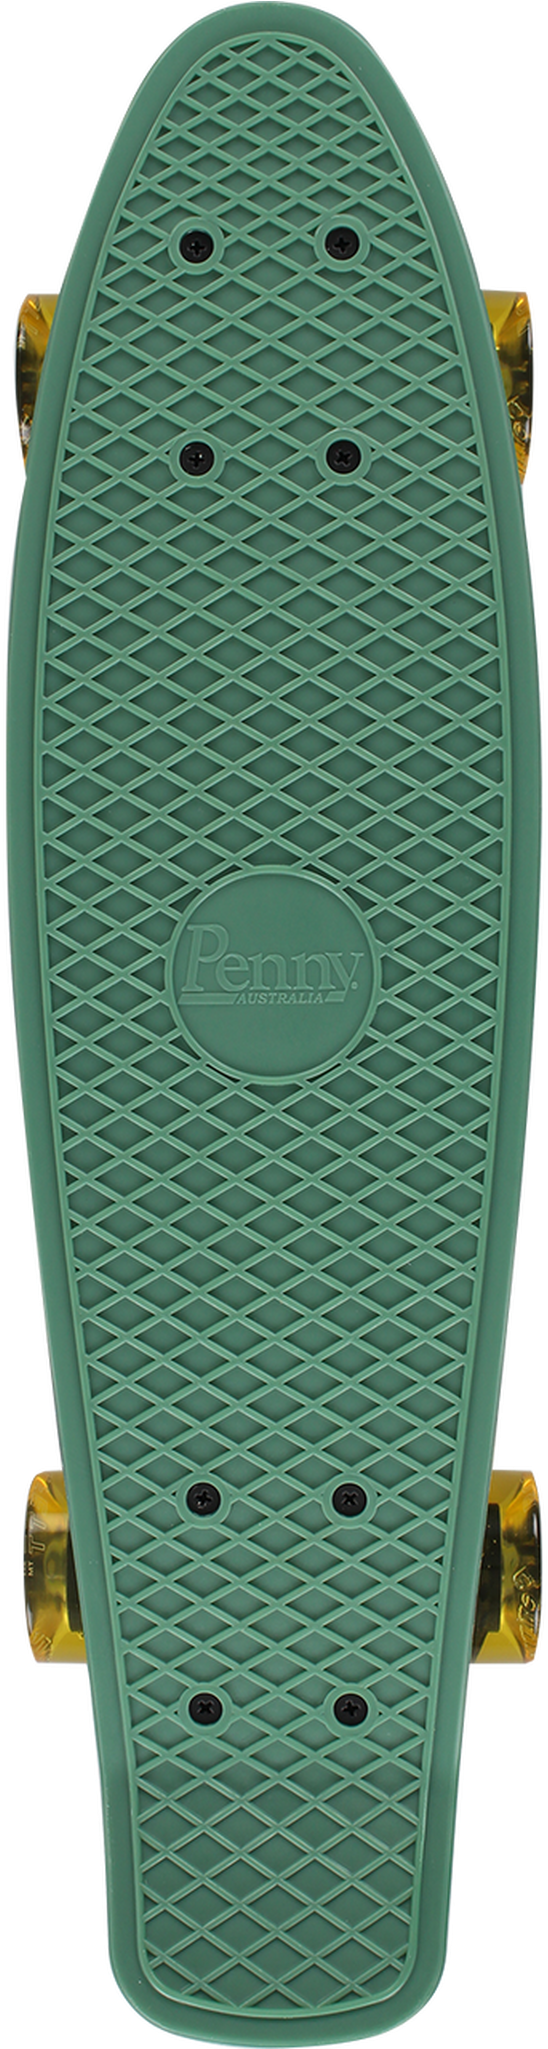 Penny Skateboard Top View PNG